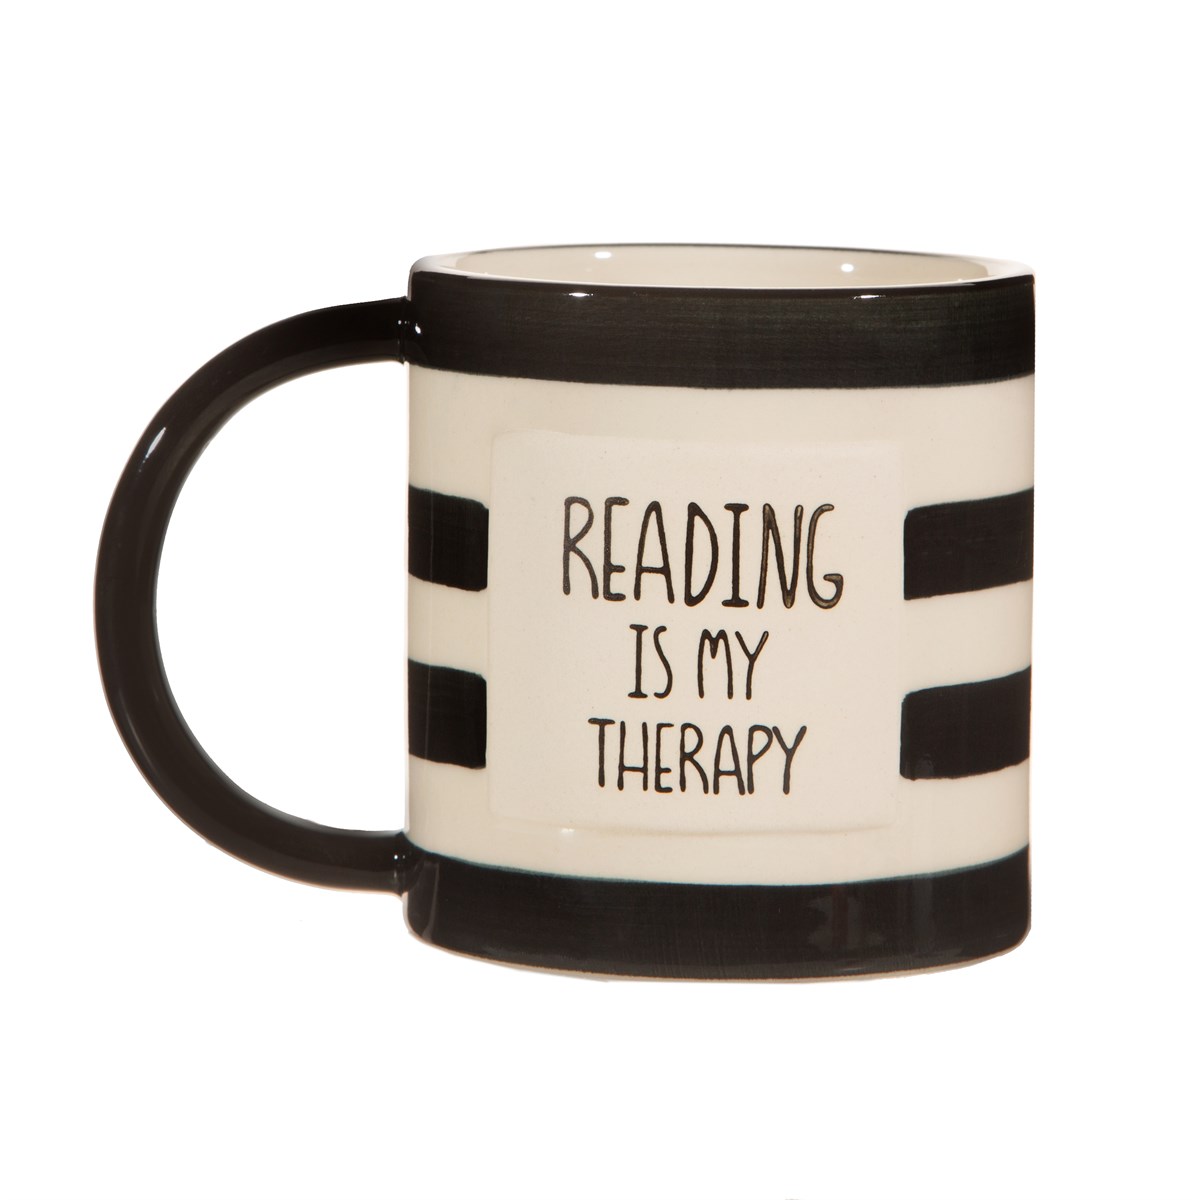 taza-therapy-reading-sass-and-belle-betina-shop_alz